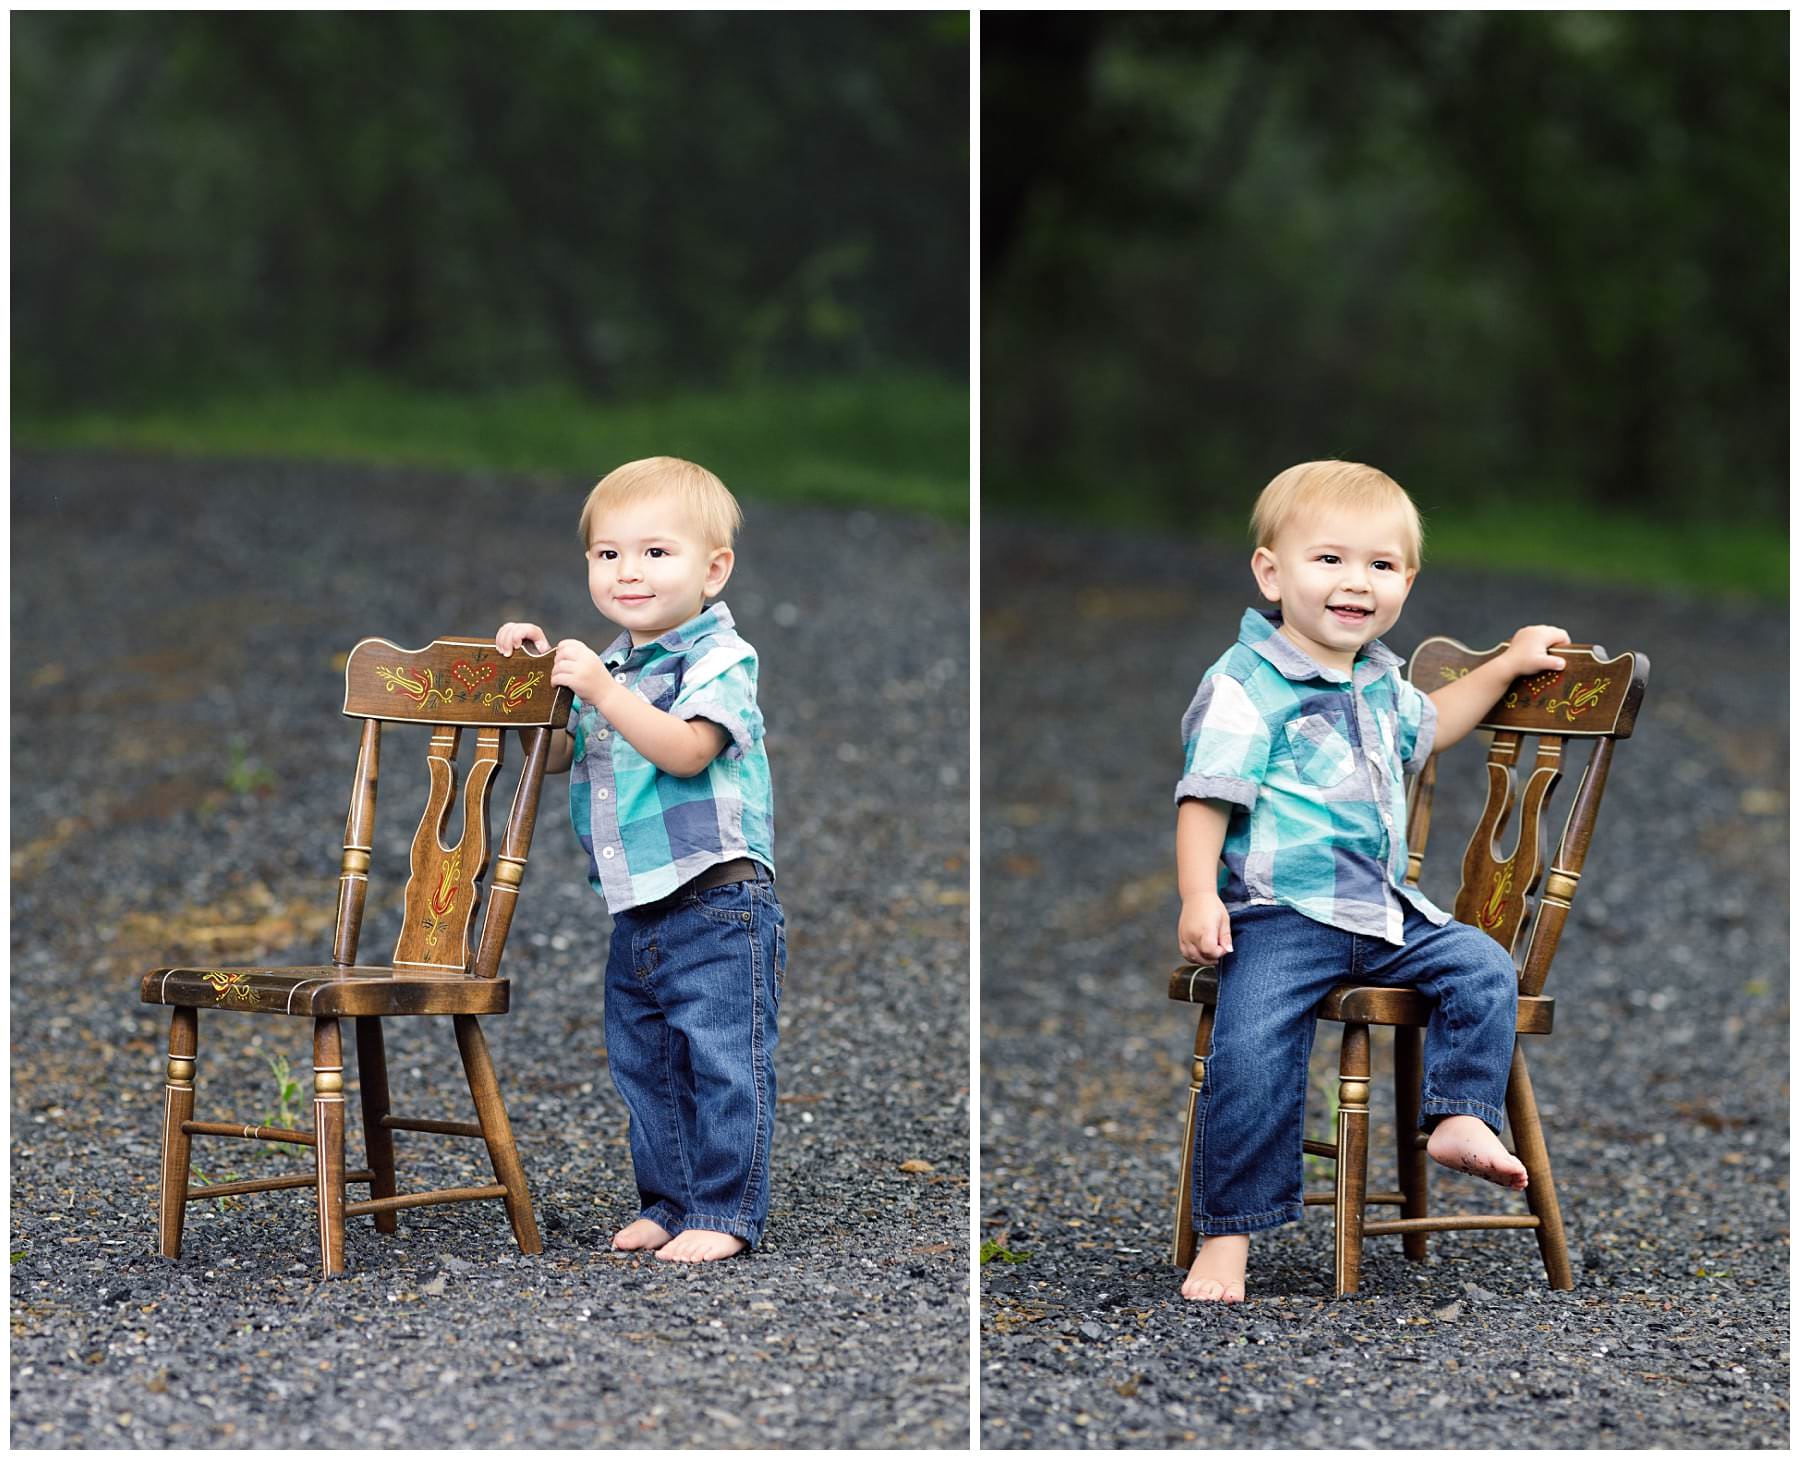 Outdoor kids portraits on stones with chair